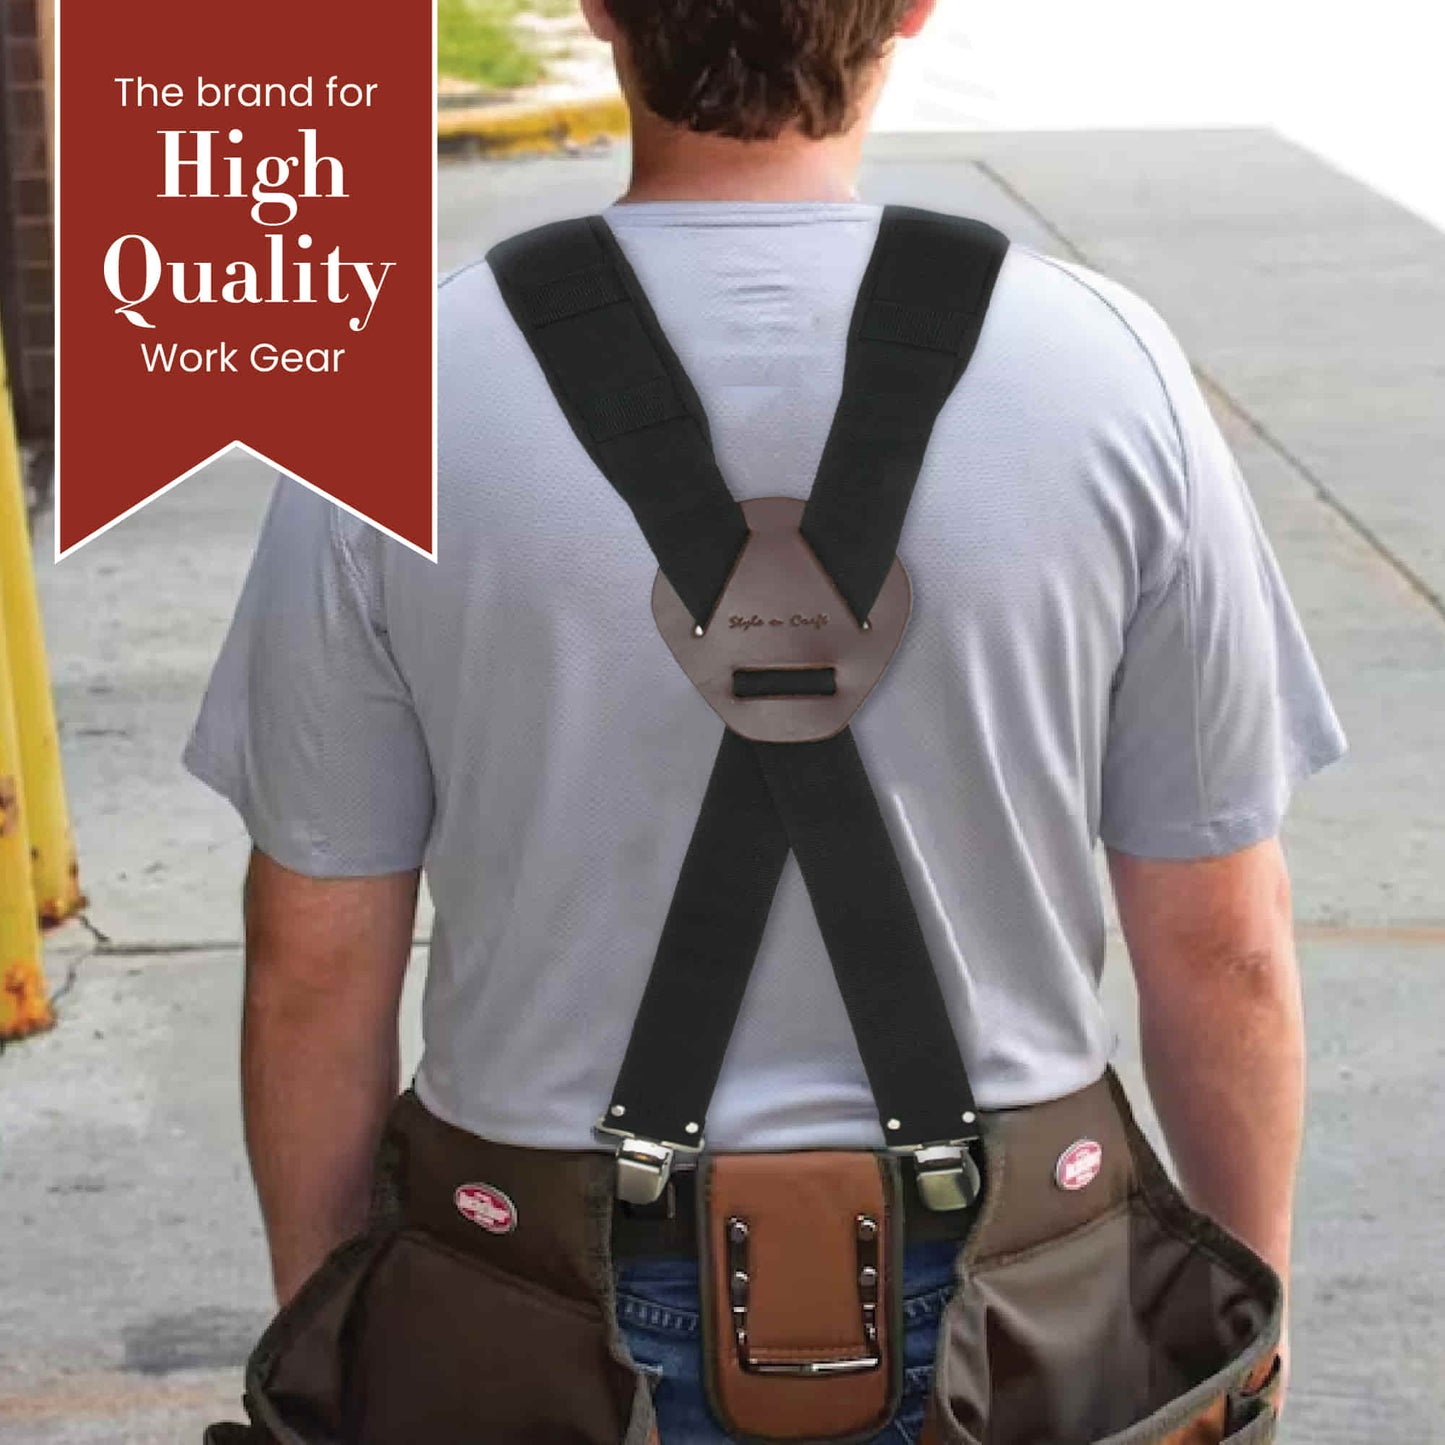 Style n Craft 95013 - 2 Inch Wide Padded Work Suspenders with Clips in Black. Versatile Double Adjustment. Picture Showing Suspenders in Use.